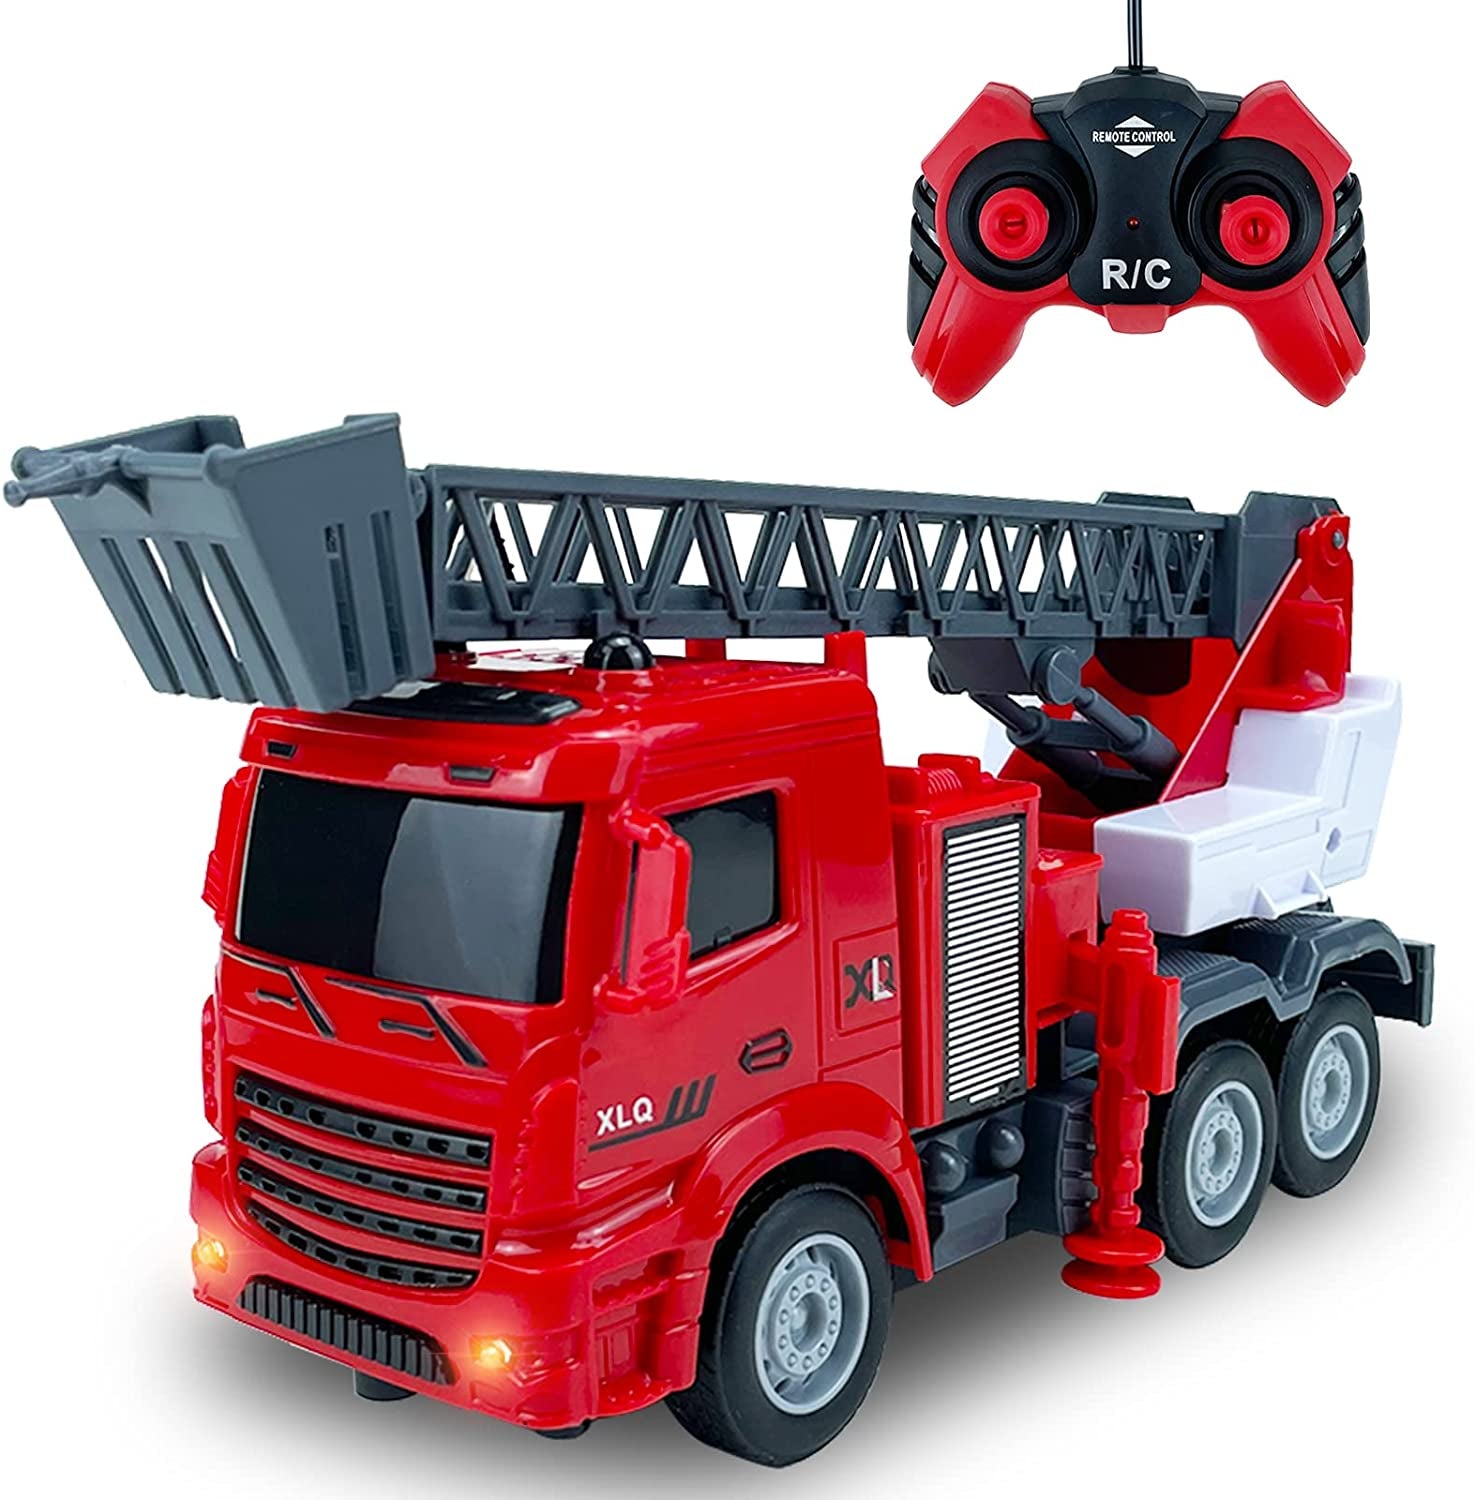 Electronic Power Fire Truck Car Toy for Toddlers Kids Boys Girls Birthday Realistic Firetruck Toy with Water Shooting & Lights & Sounds & Extending Ladder Functions